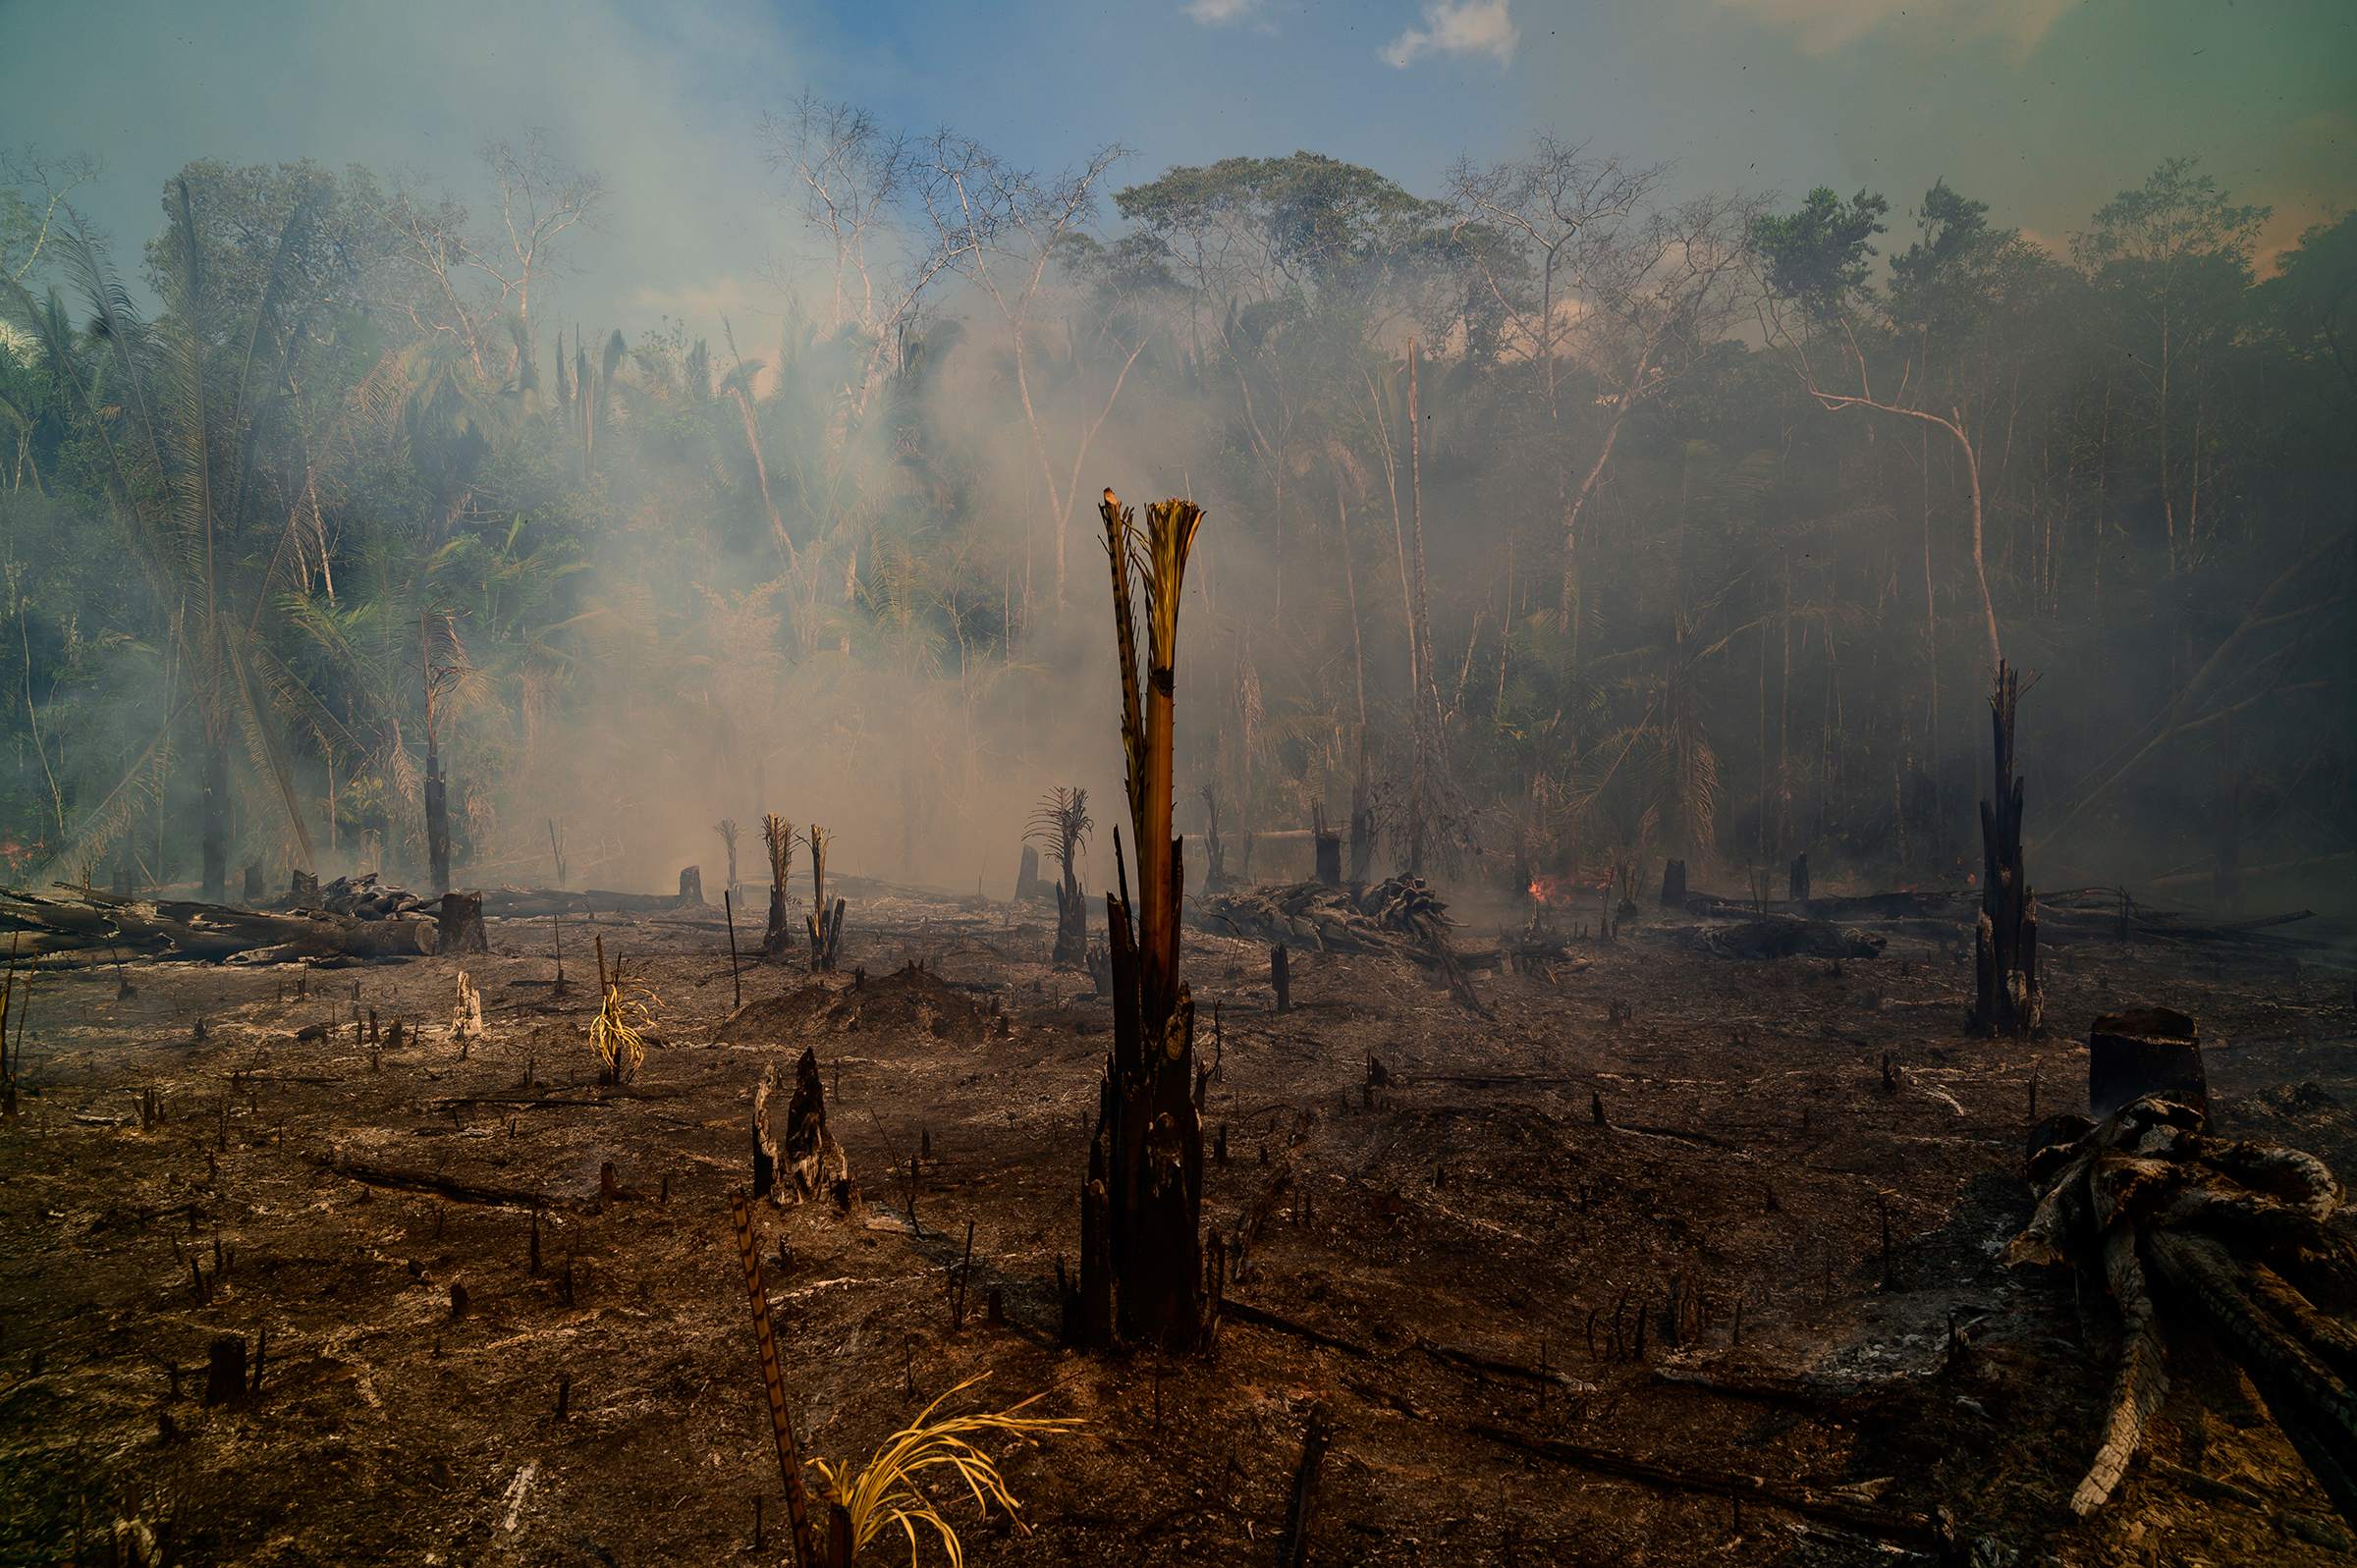 See Photos of the Amazon Rainforest Fires in Brazil Time